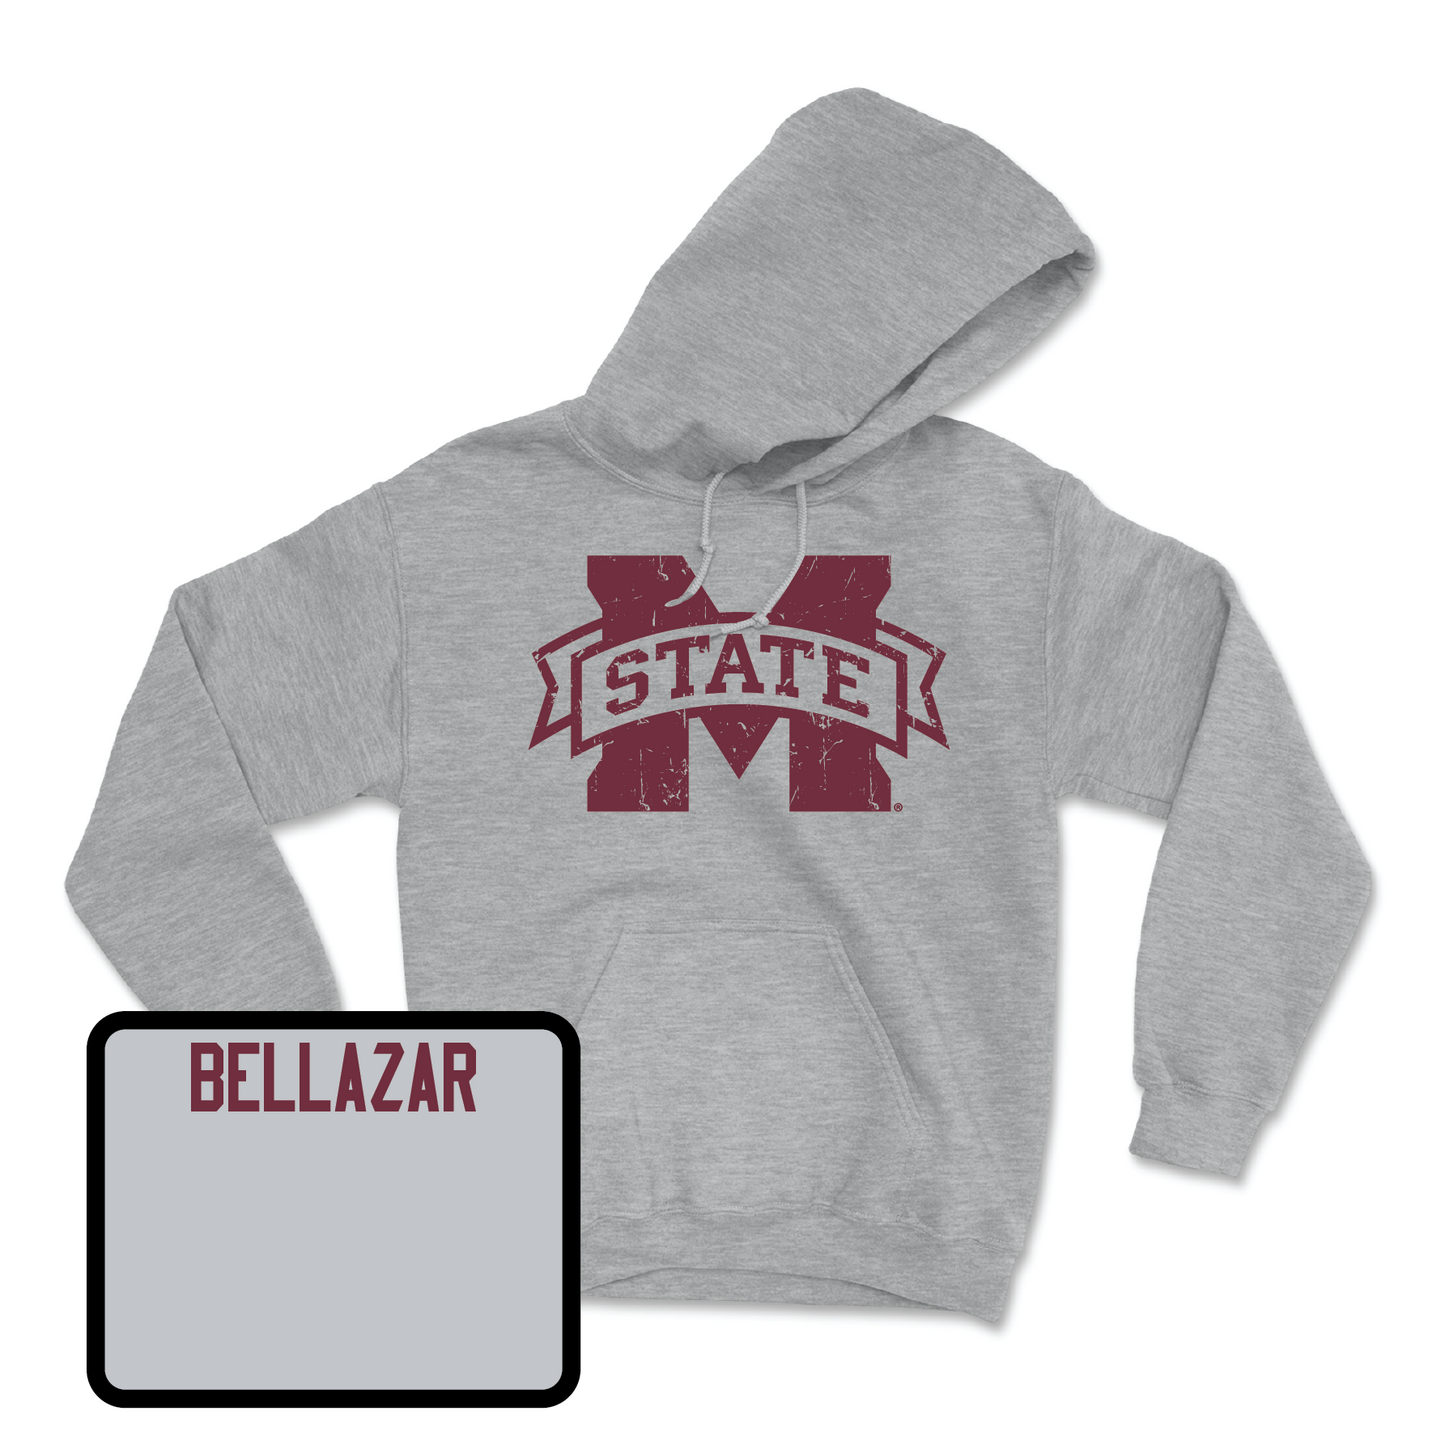 Sport Grey Football Classic Hoodie 3X-Large / Jacoby Bellazar | #